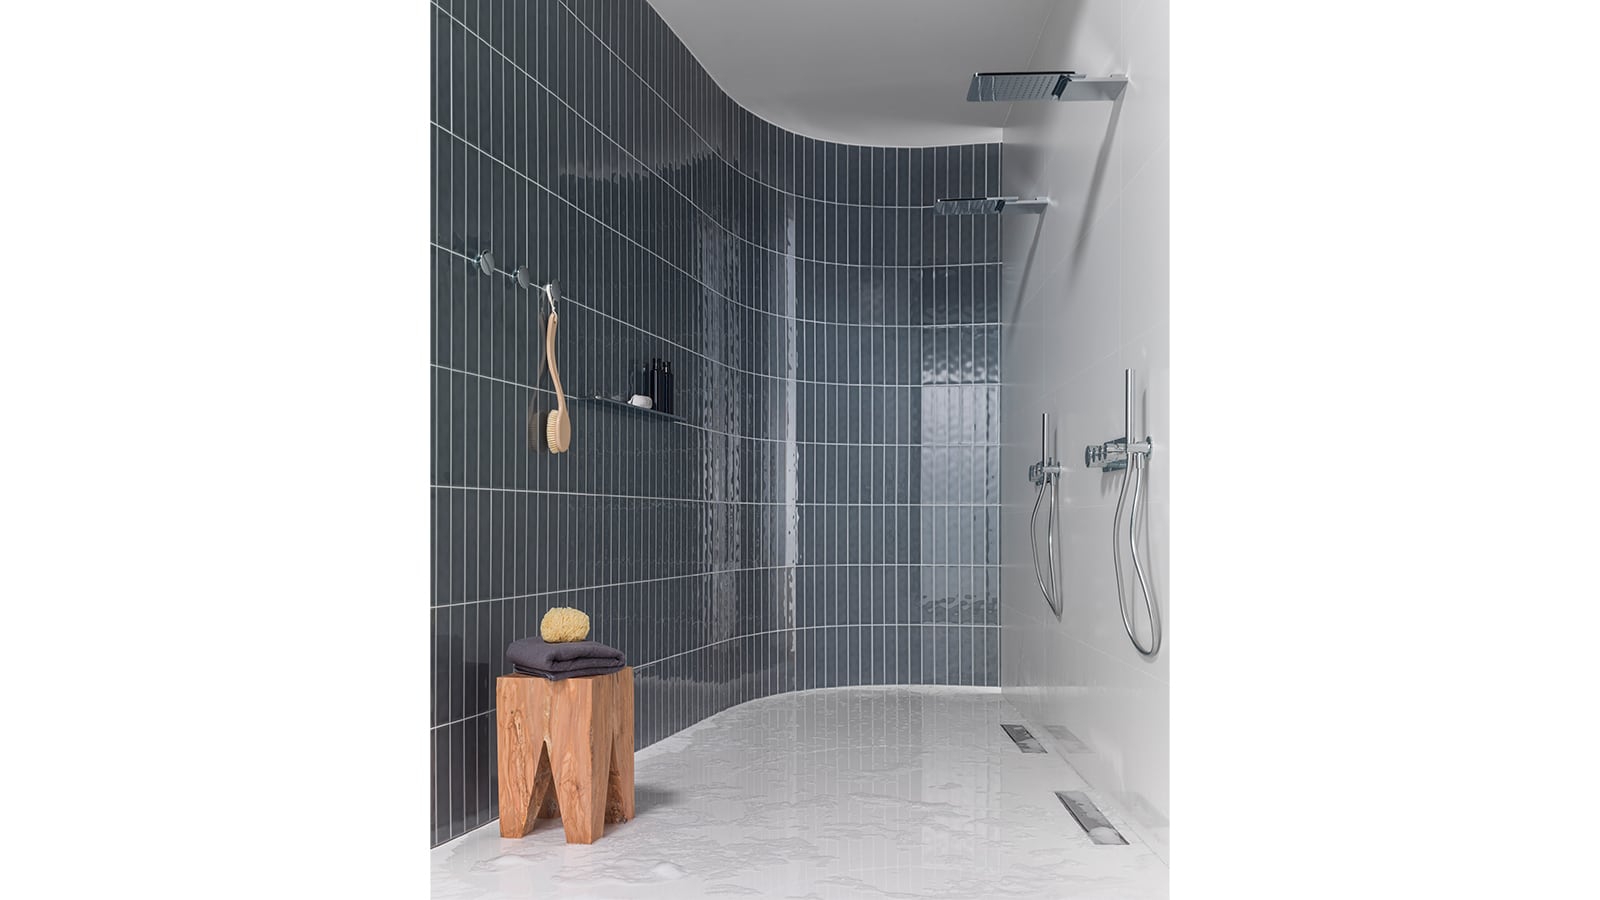 Malaga Ocean and Marmi China wall tiles by Porcelanosa, and Lineal Chrome grid by Butech.